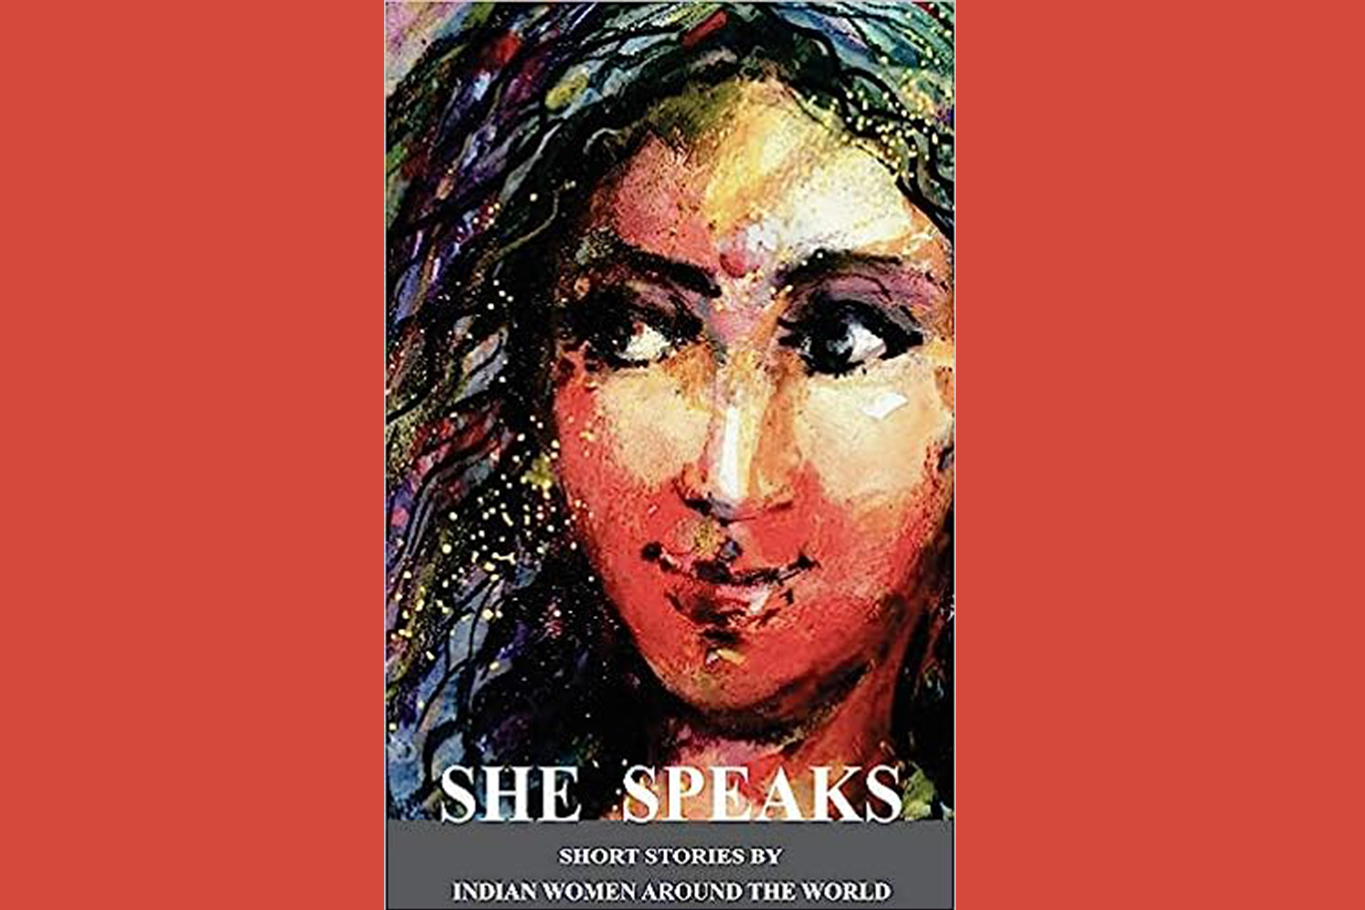 She Speaks - By 20 Indian Women Around the World